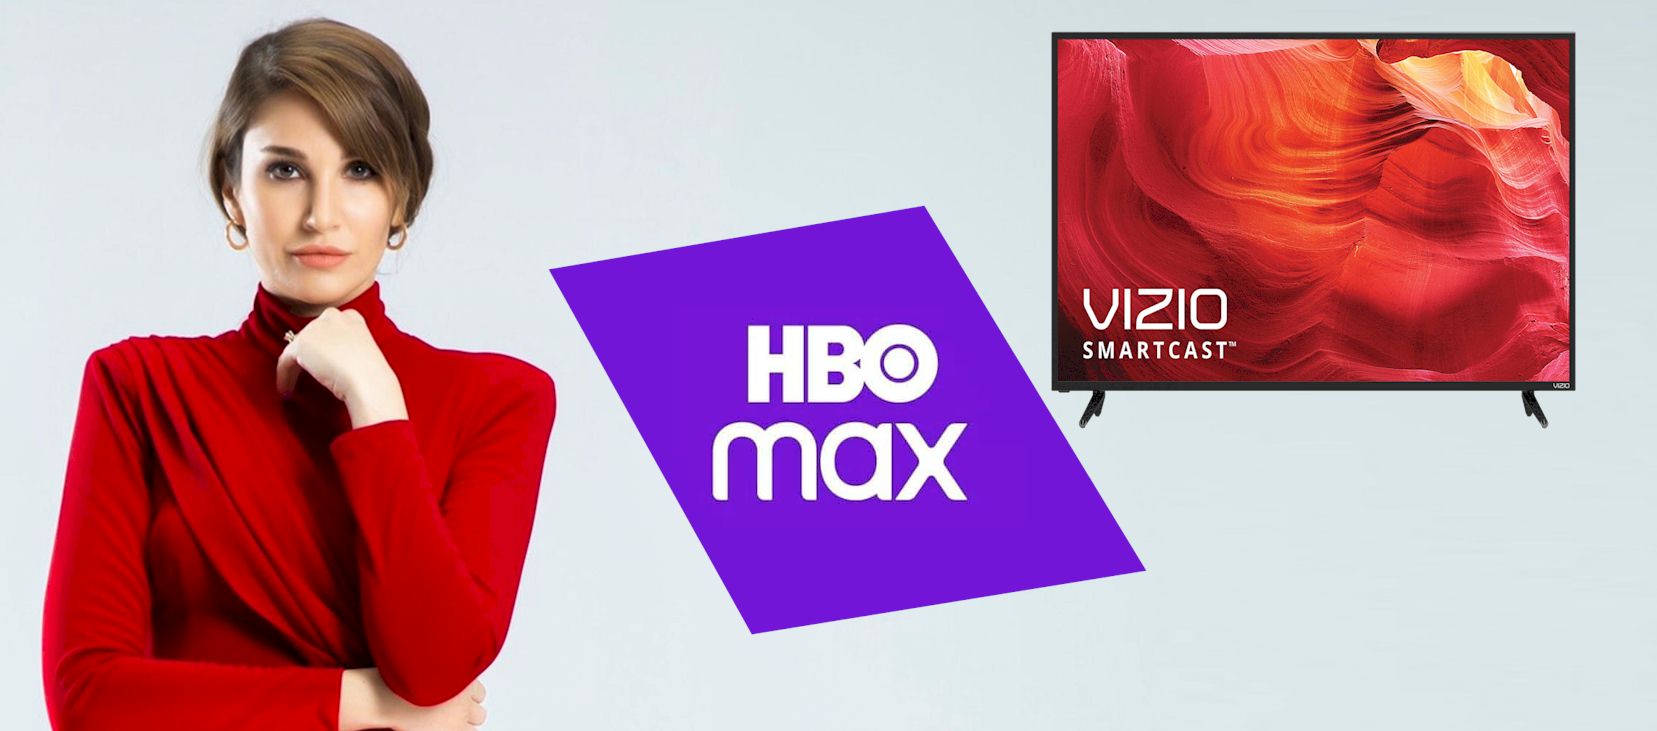 How to get HBO max on Vizio smart tv